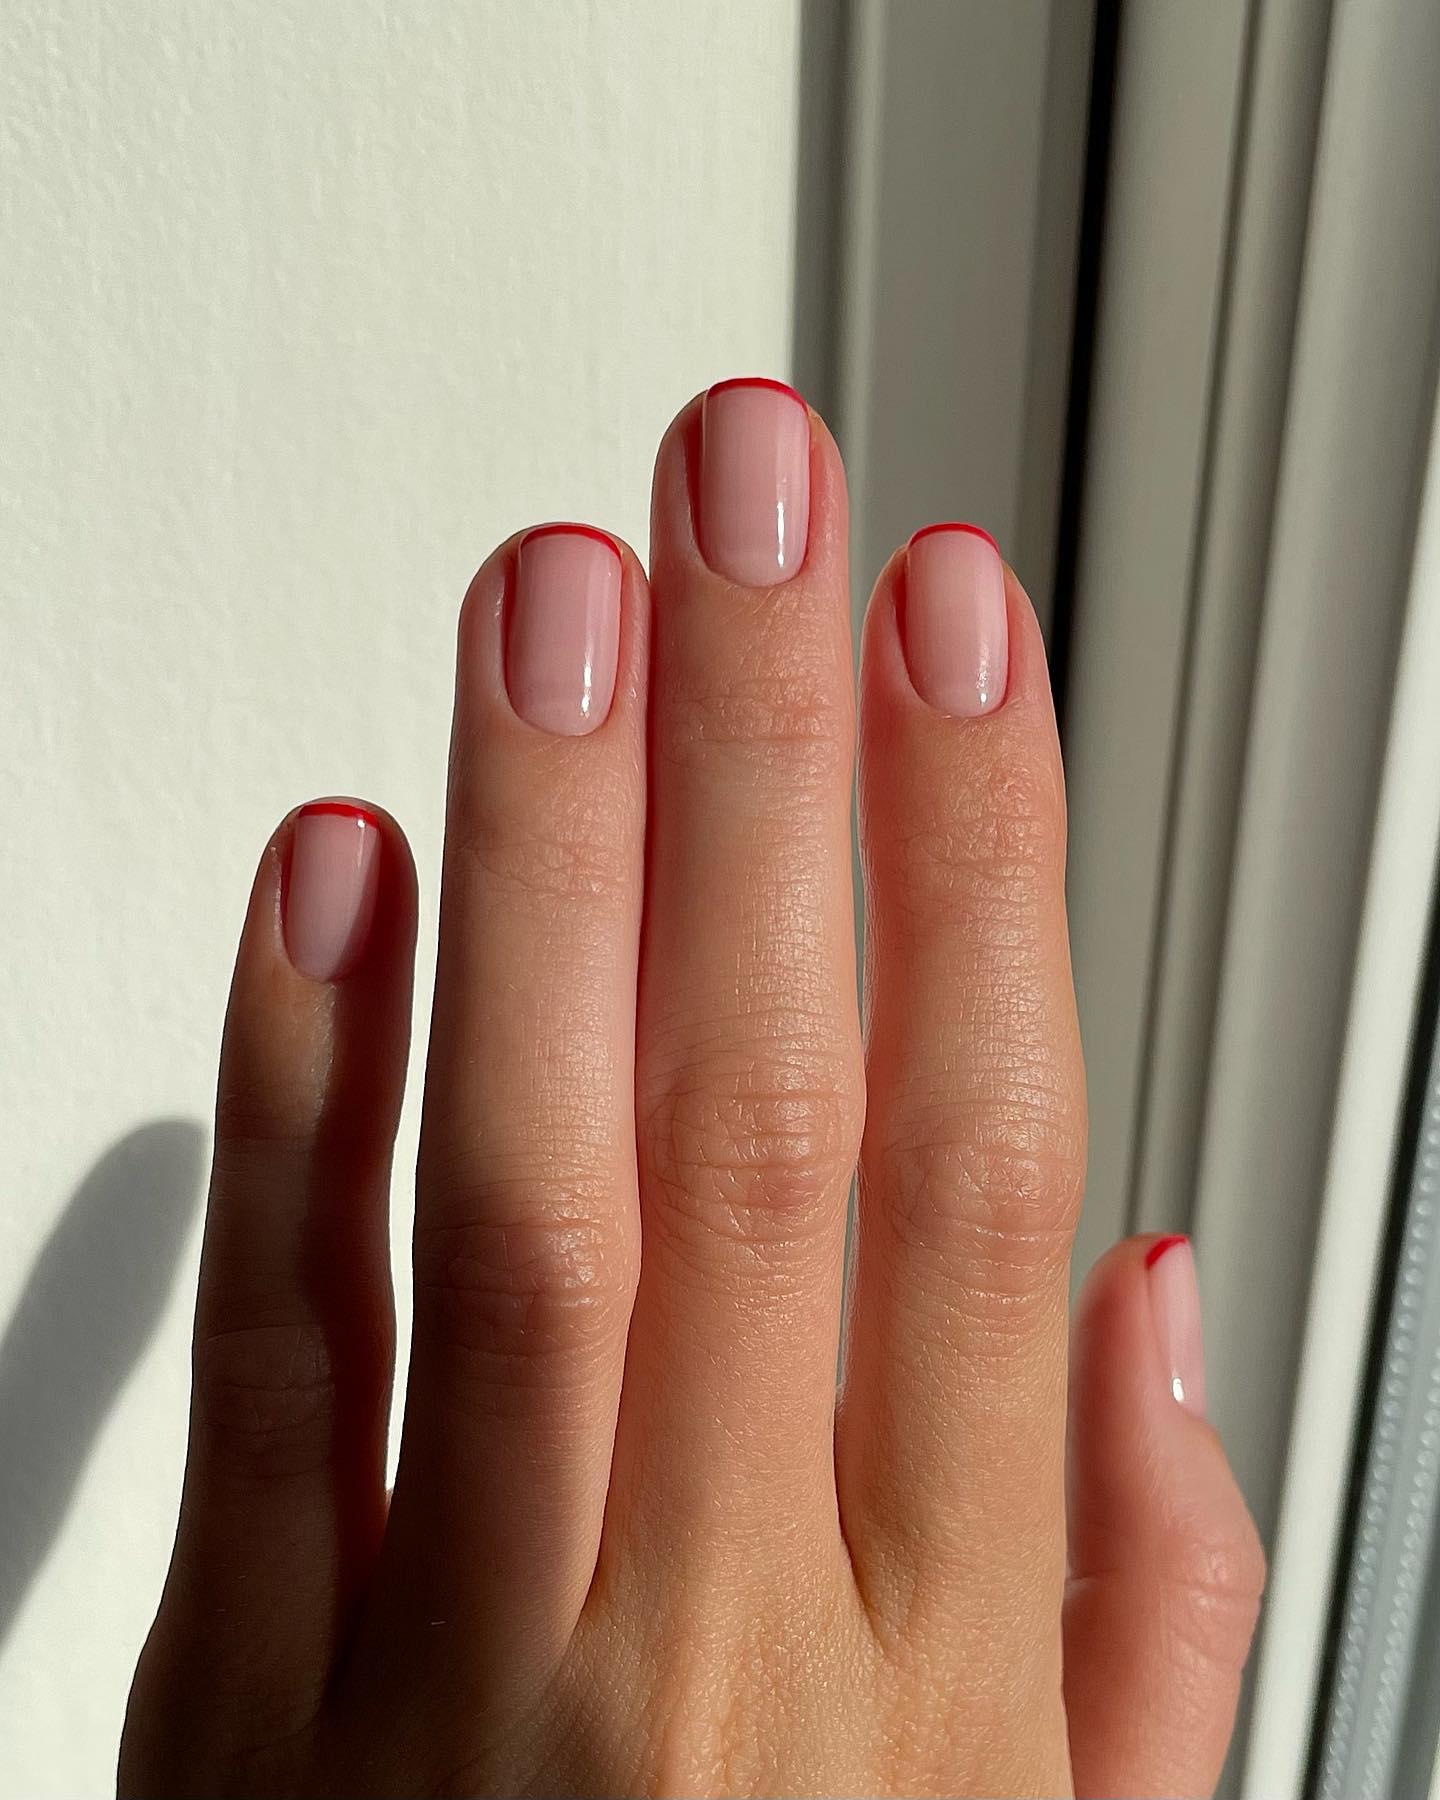 French manicure with red tips